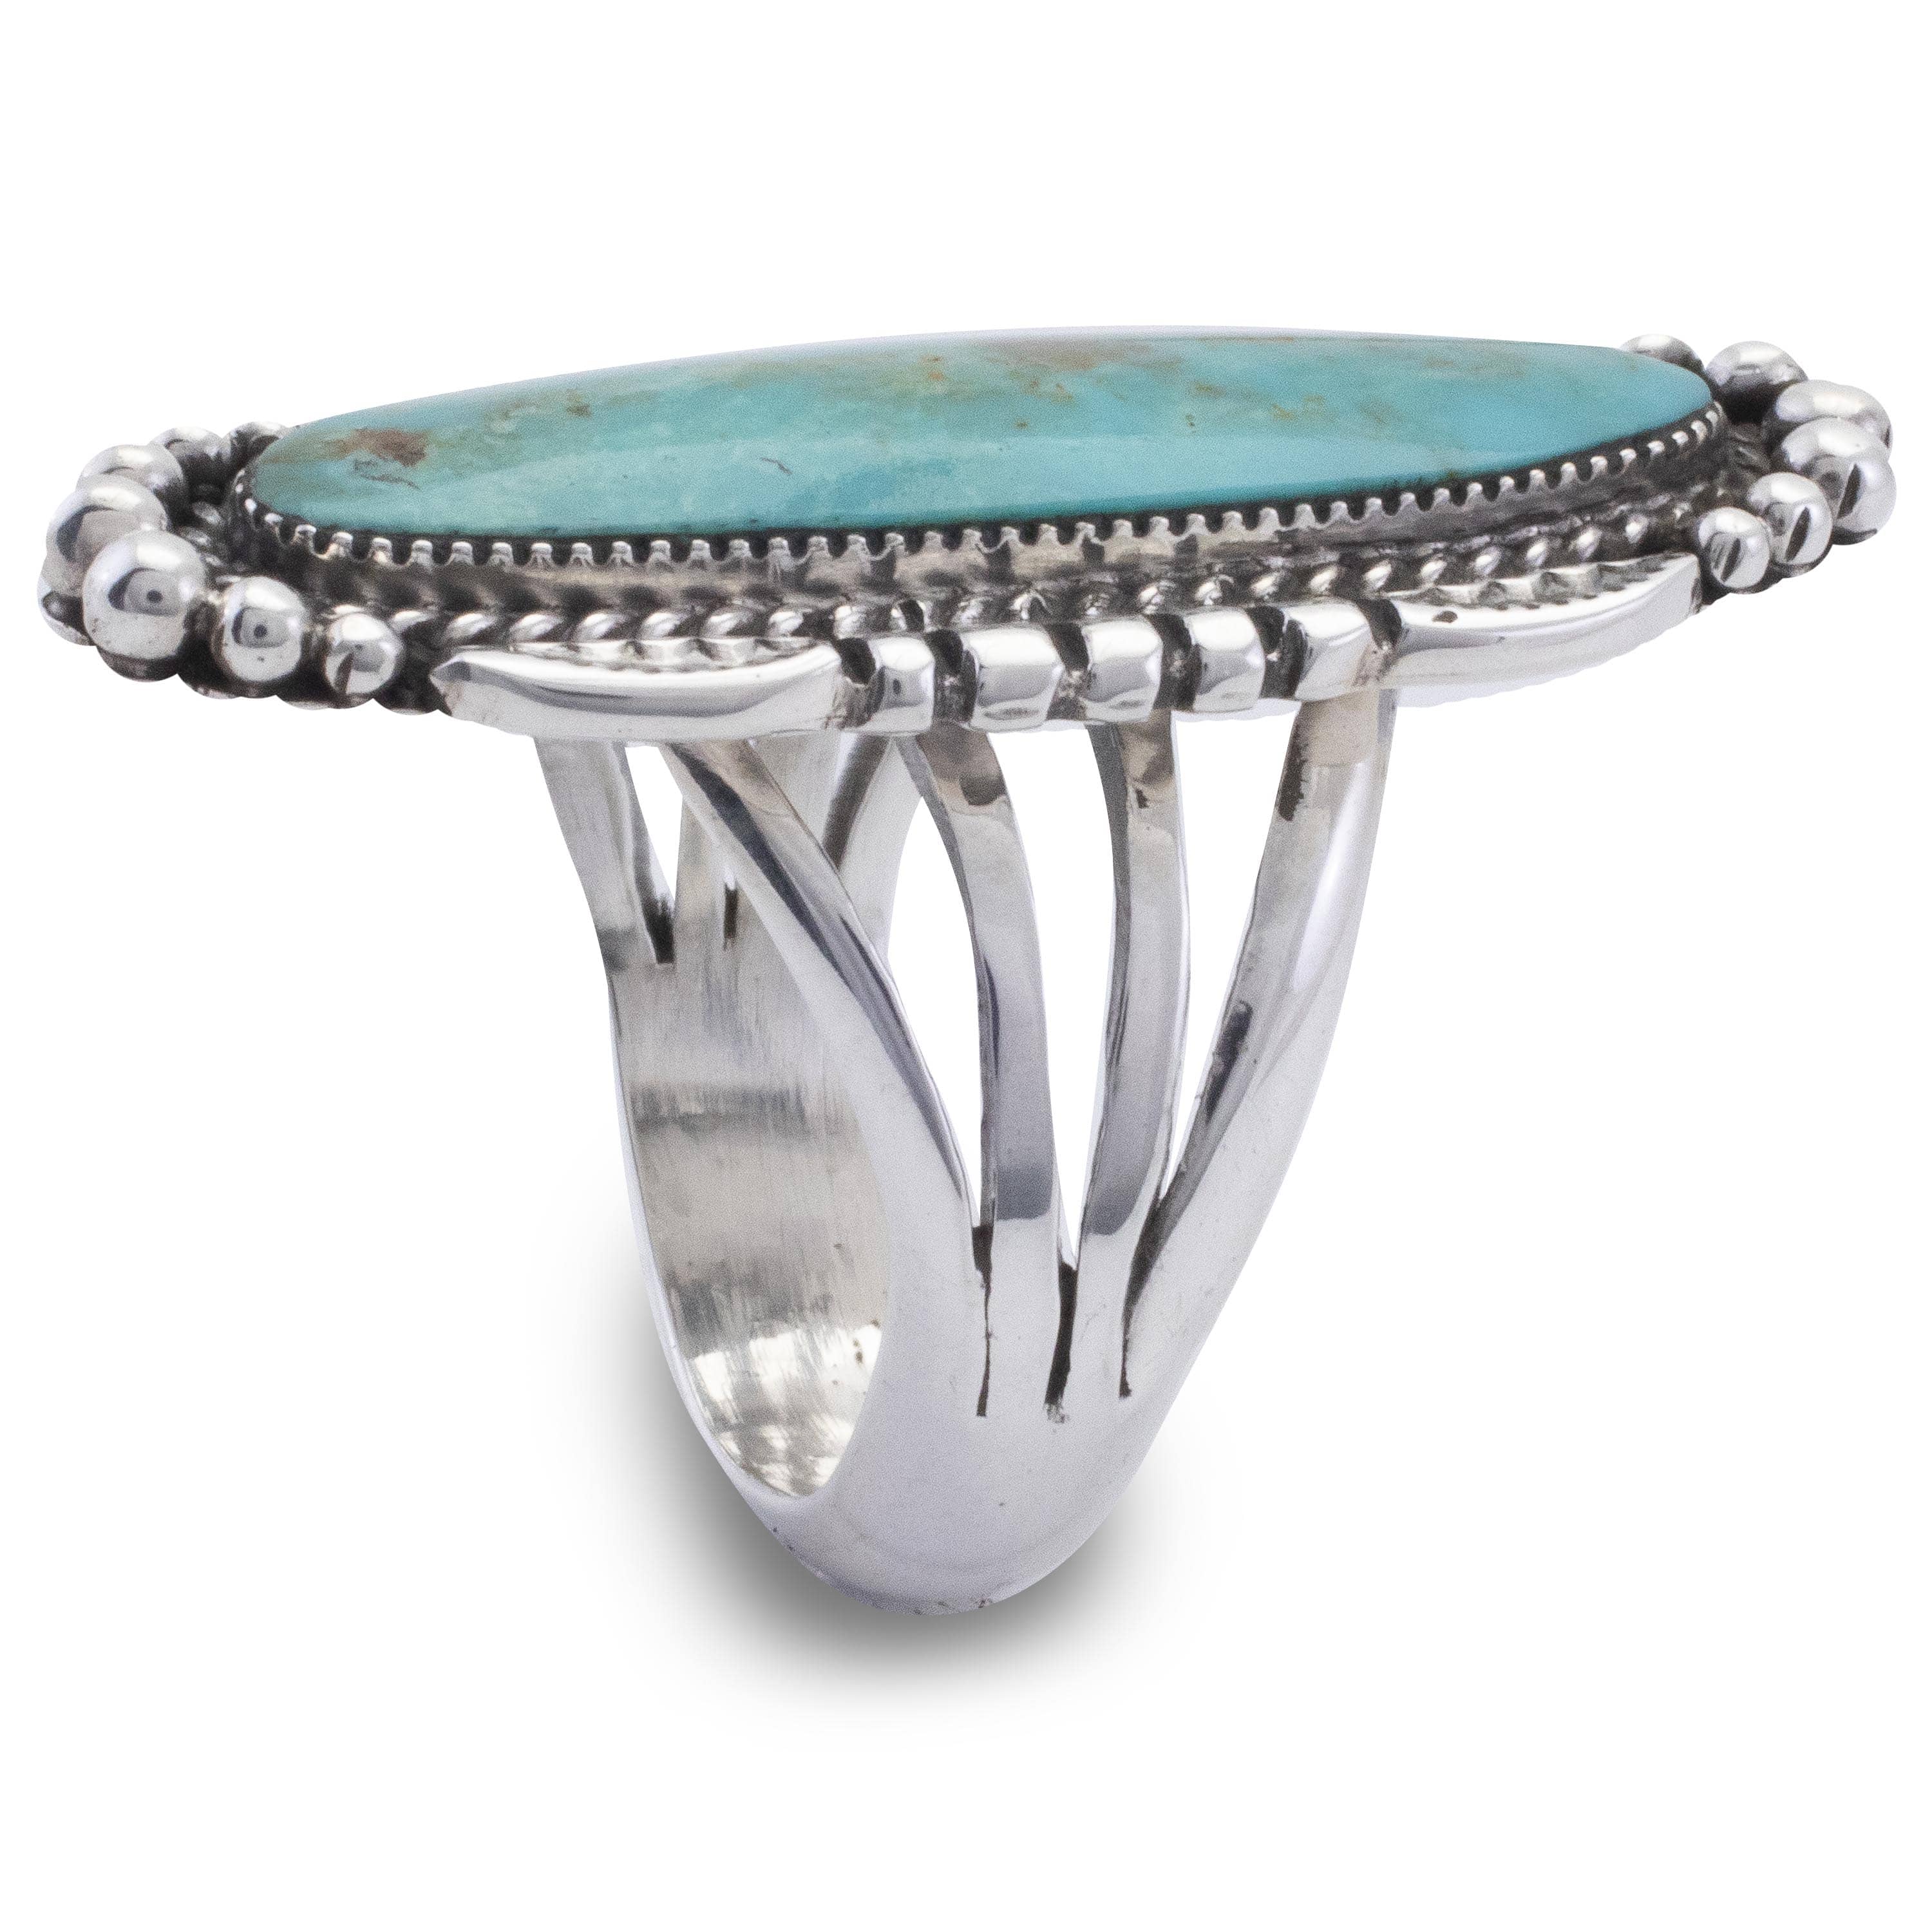 Kalifano Native American Jewelry 9 Kingman Turquoise USA Native American Made 925 Sterling Silver Ring NAR900.029.9